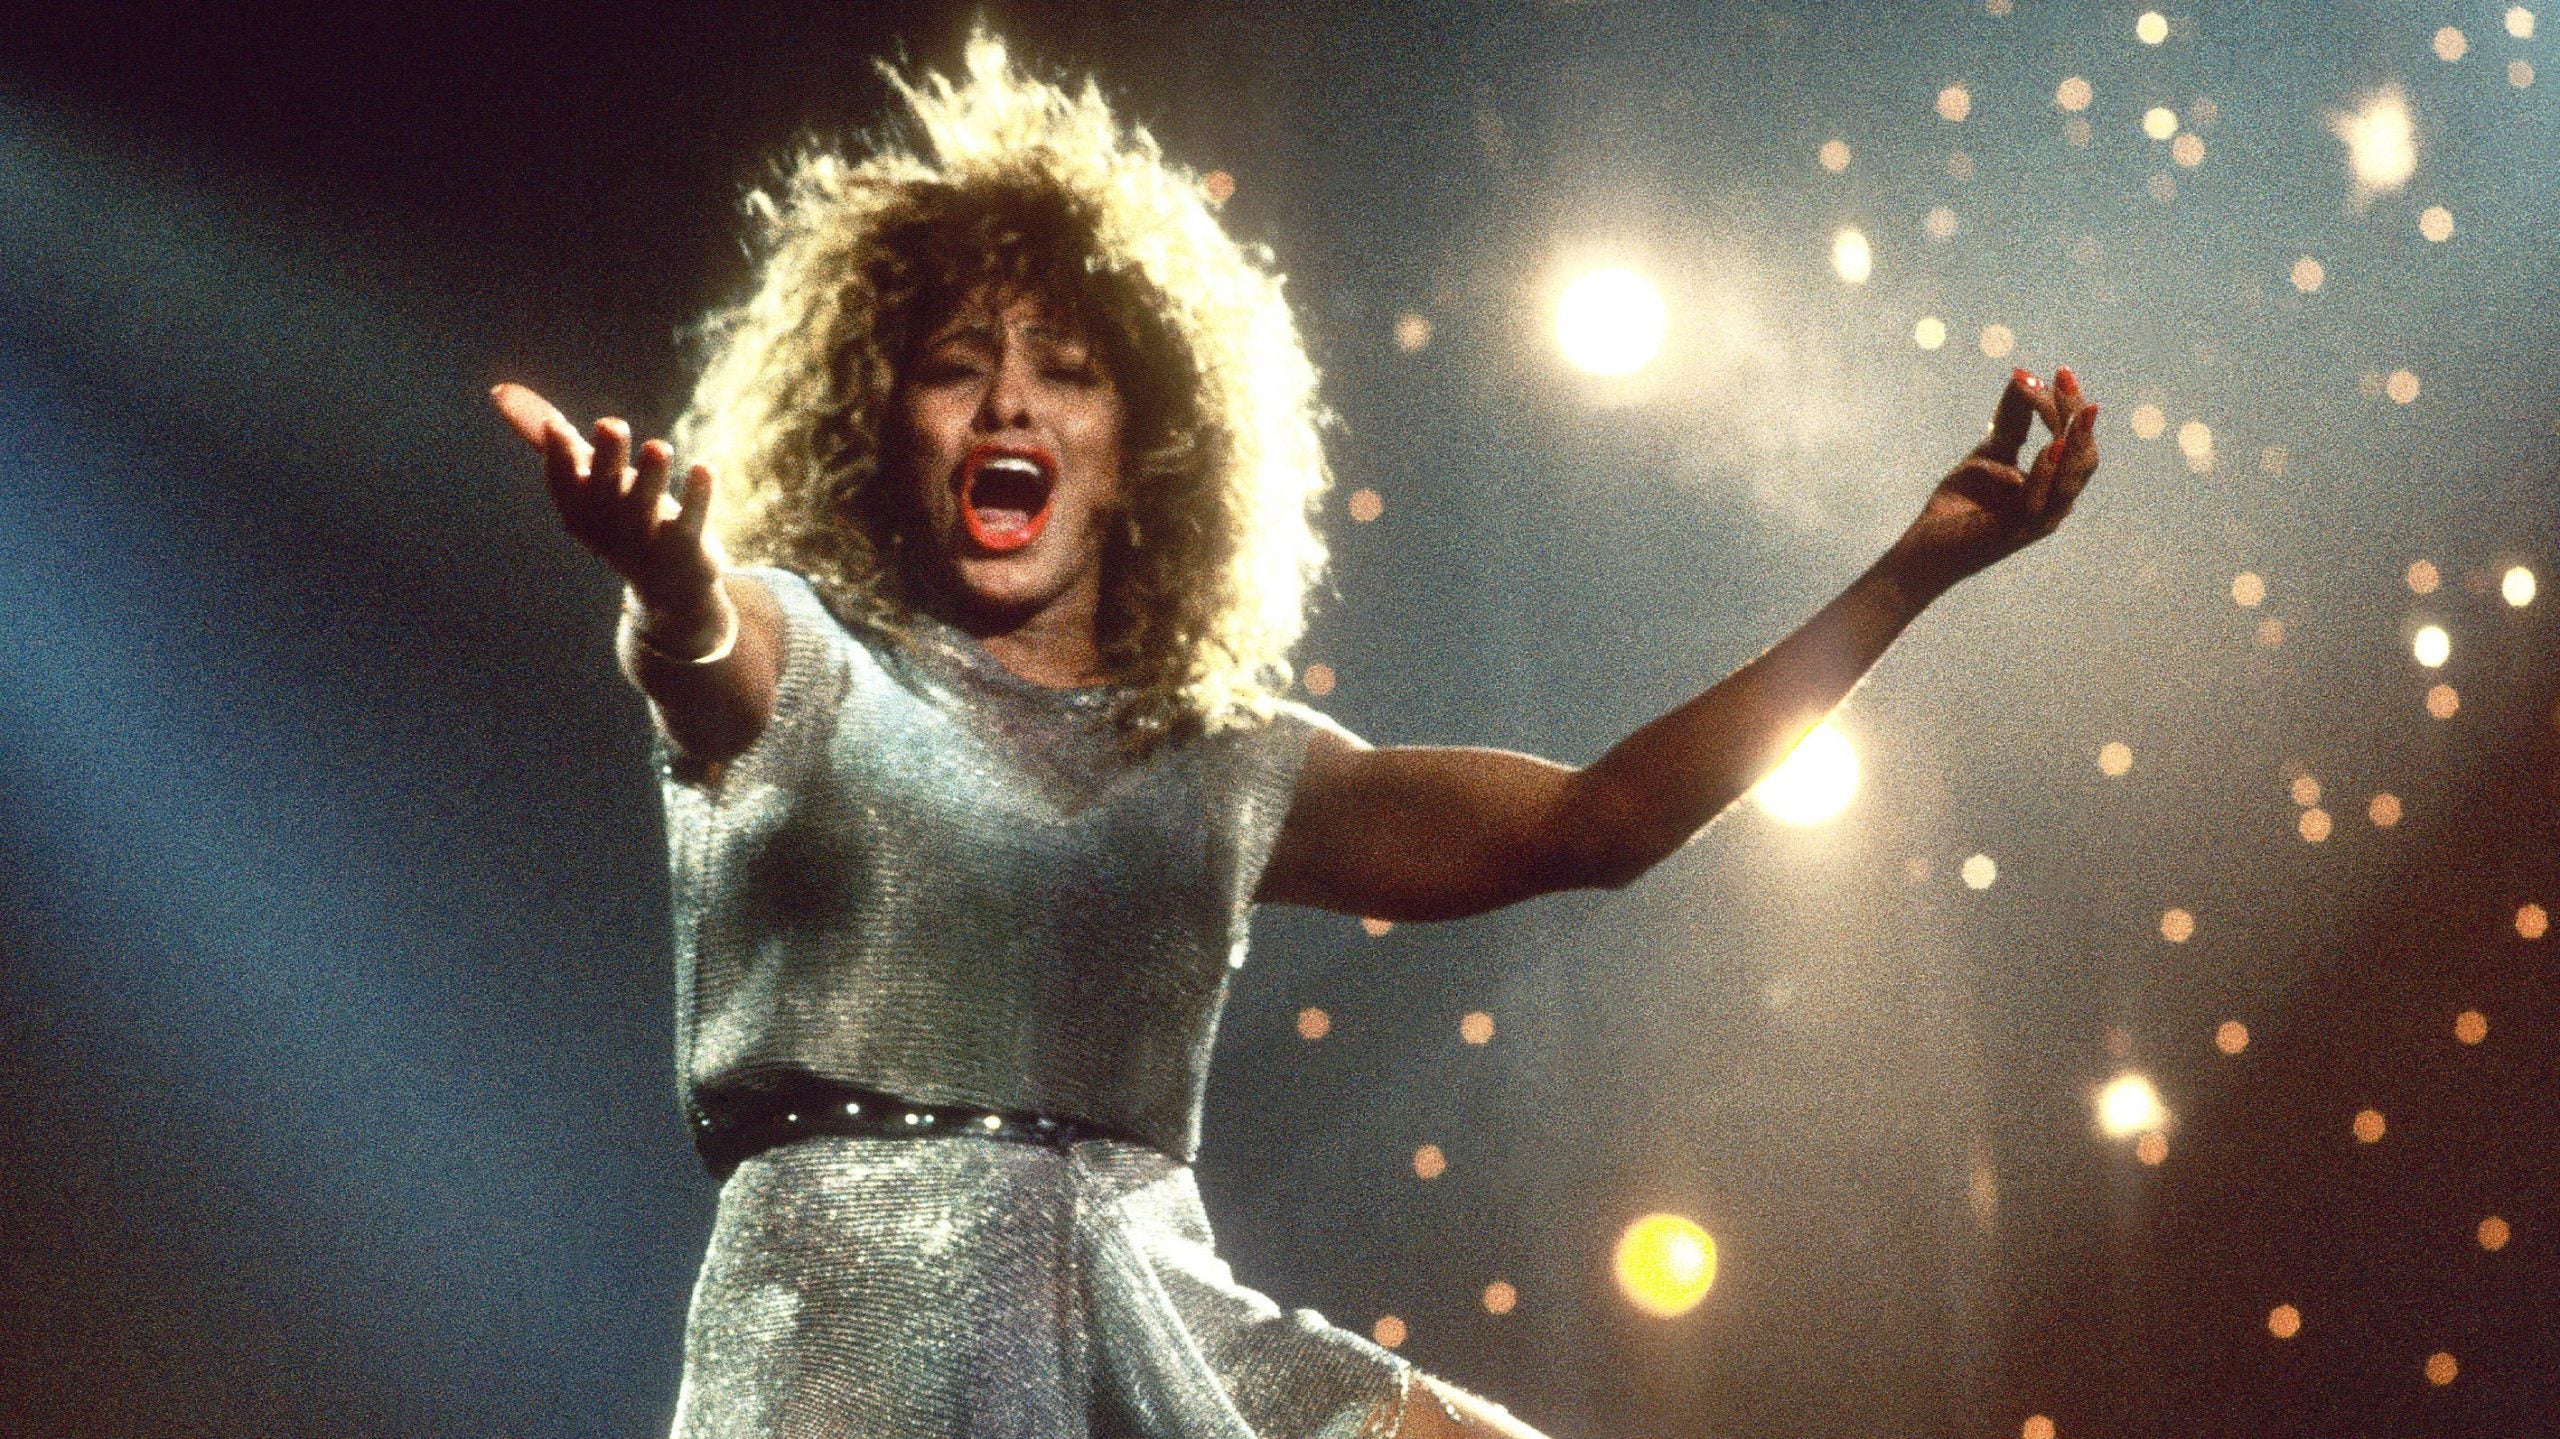 Tina Turner and Jay-Z Among This Year's Rock & Roll Hall of Fame Inductees